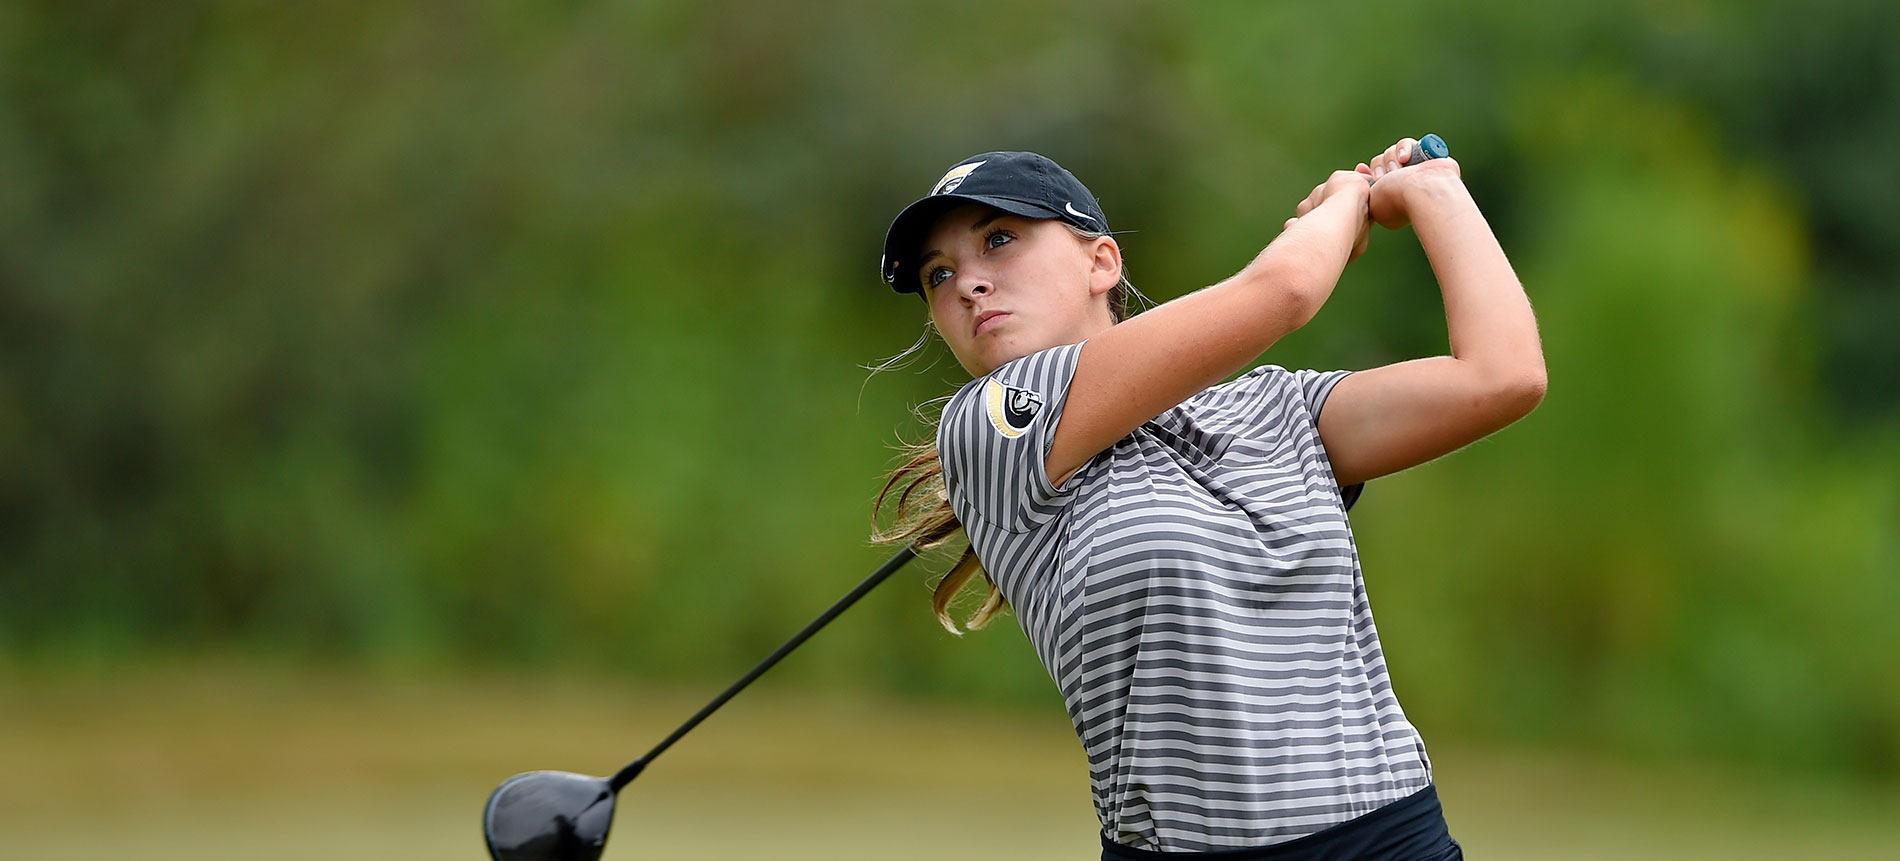 Women’s Golf Well Represented at Recent South Carolina State Amateur Championship